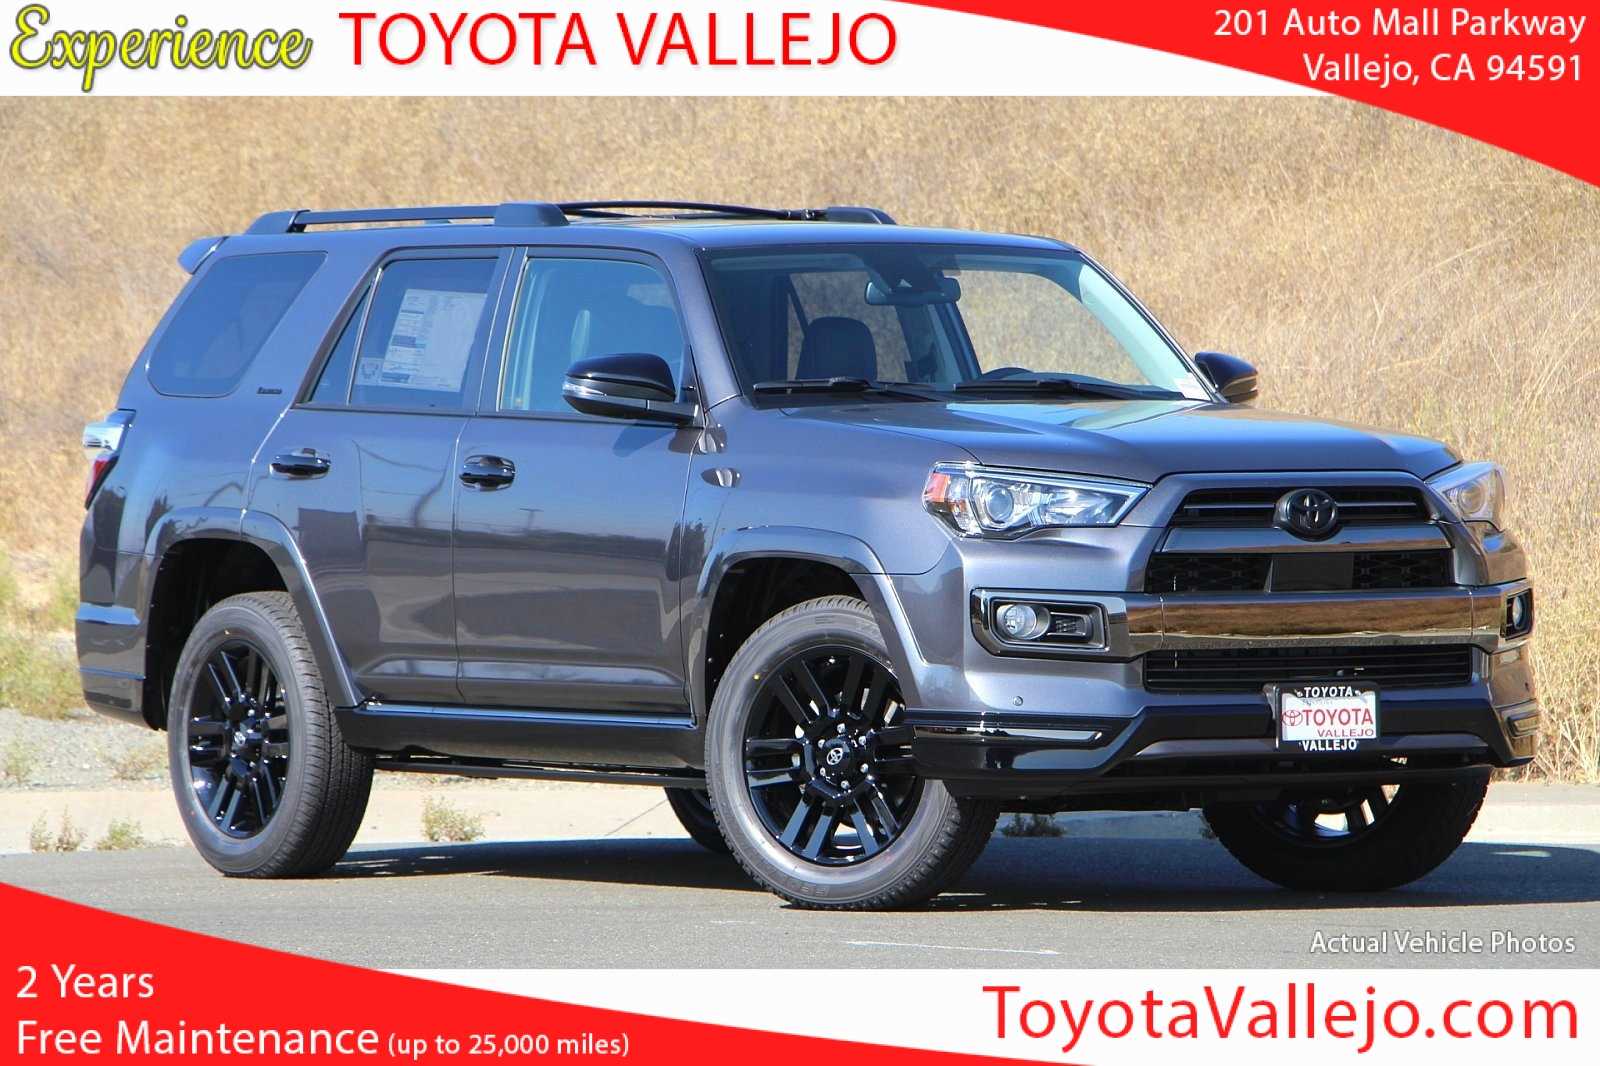 New 2020 Toyota 4runner 4 0l Nightshade Special Edition Four Wheel Drive Suv